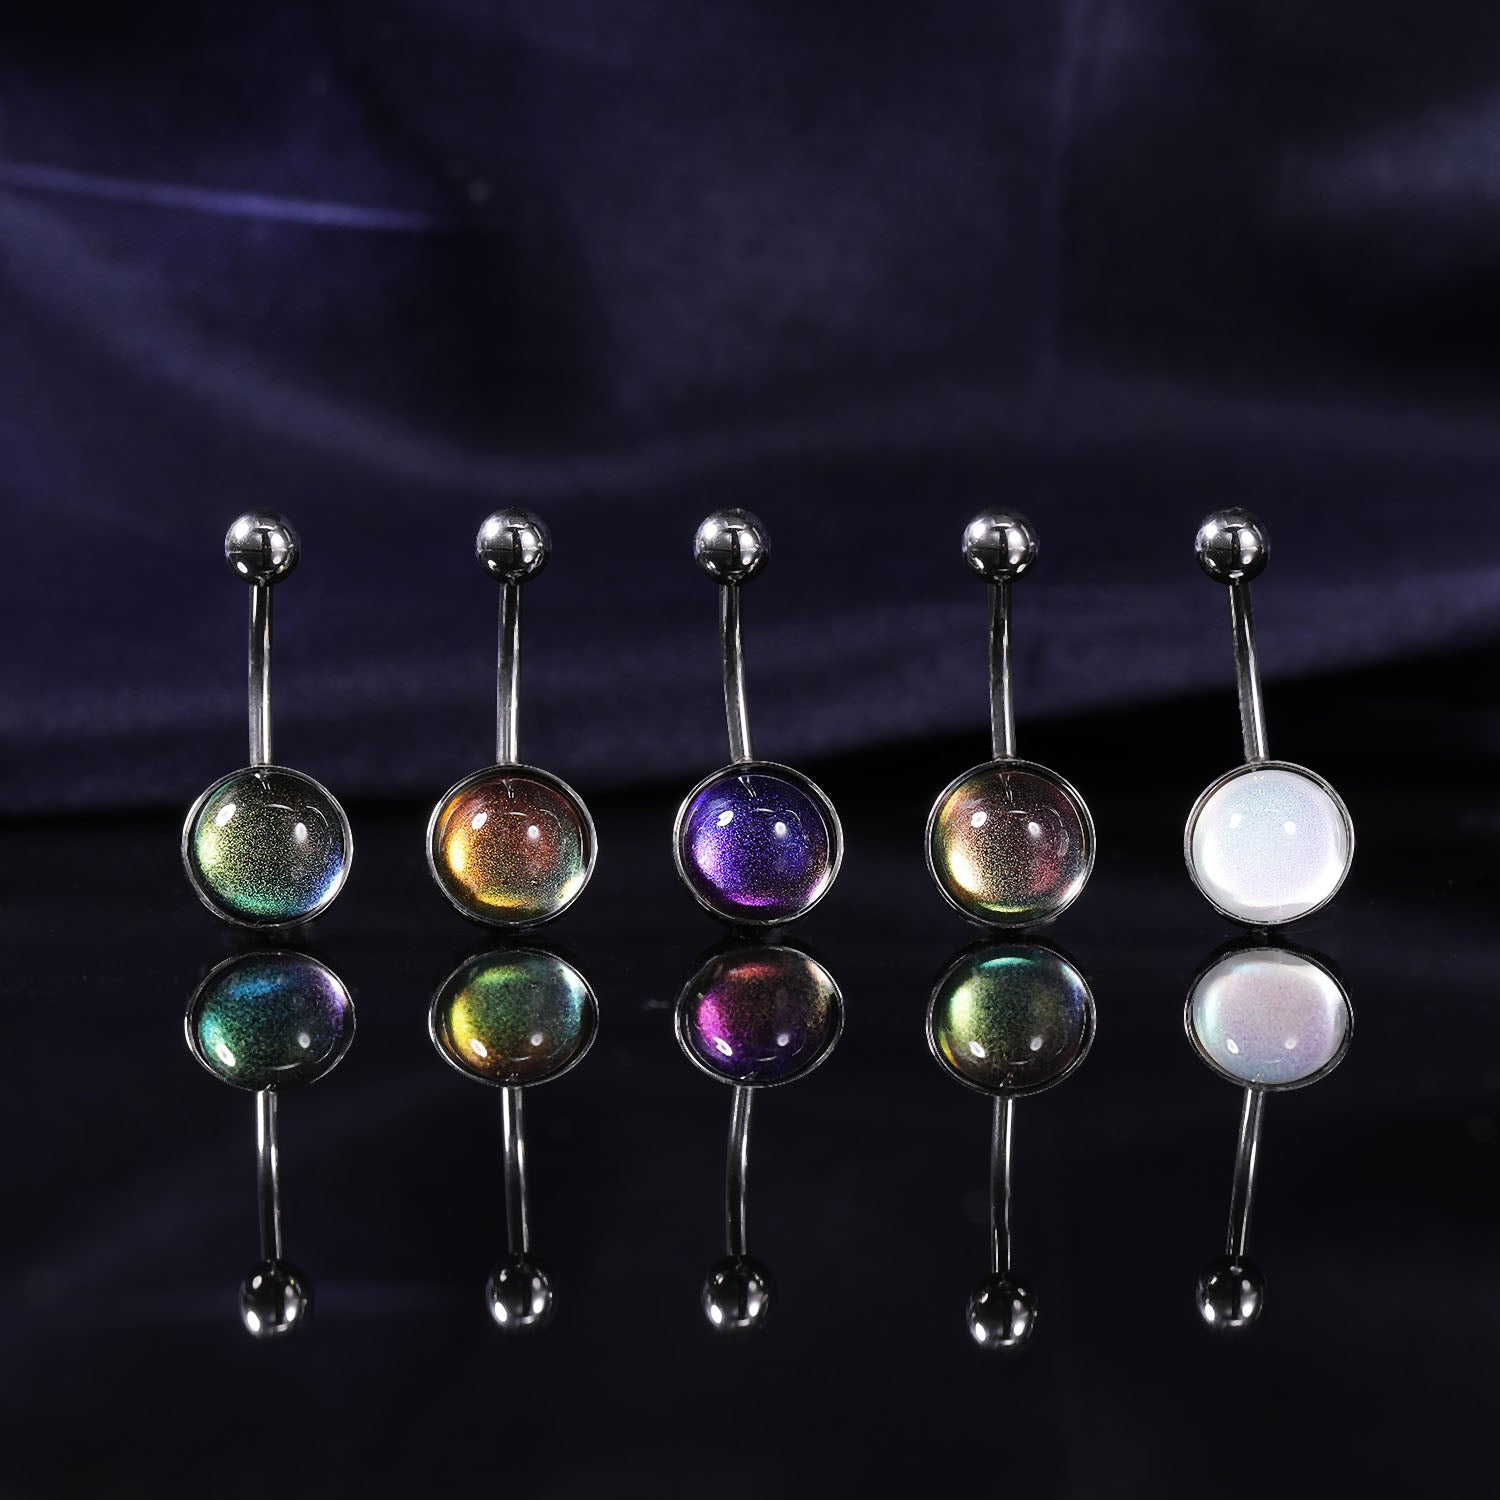 14g-starlight-belly-button-rings-banana-belly-navel-piercing-jewelry